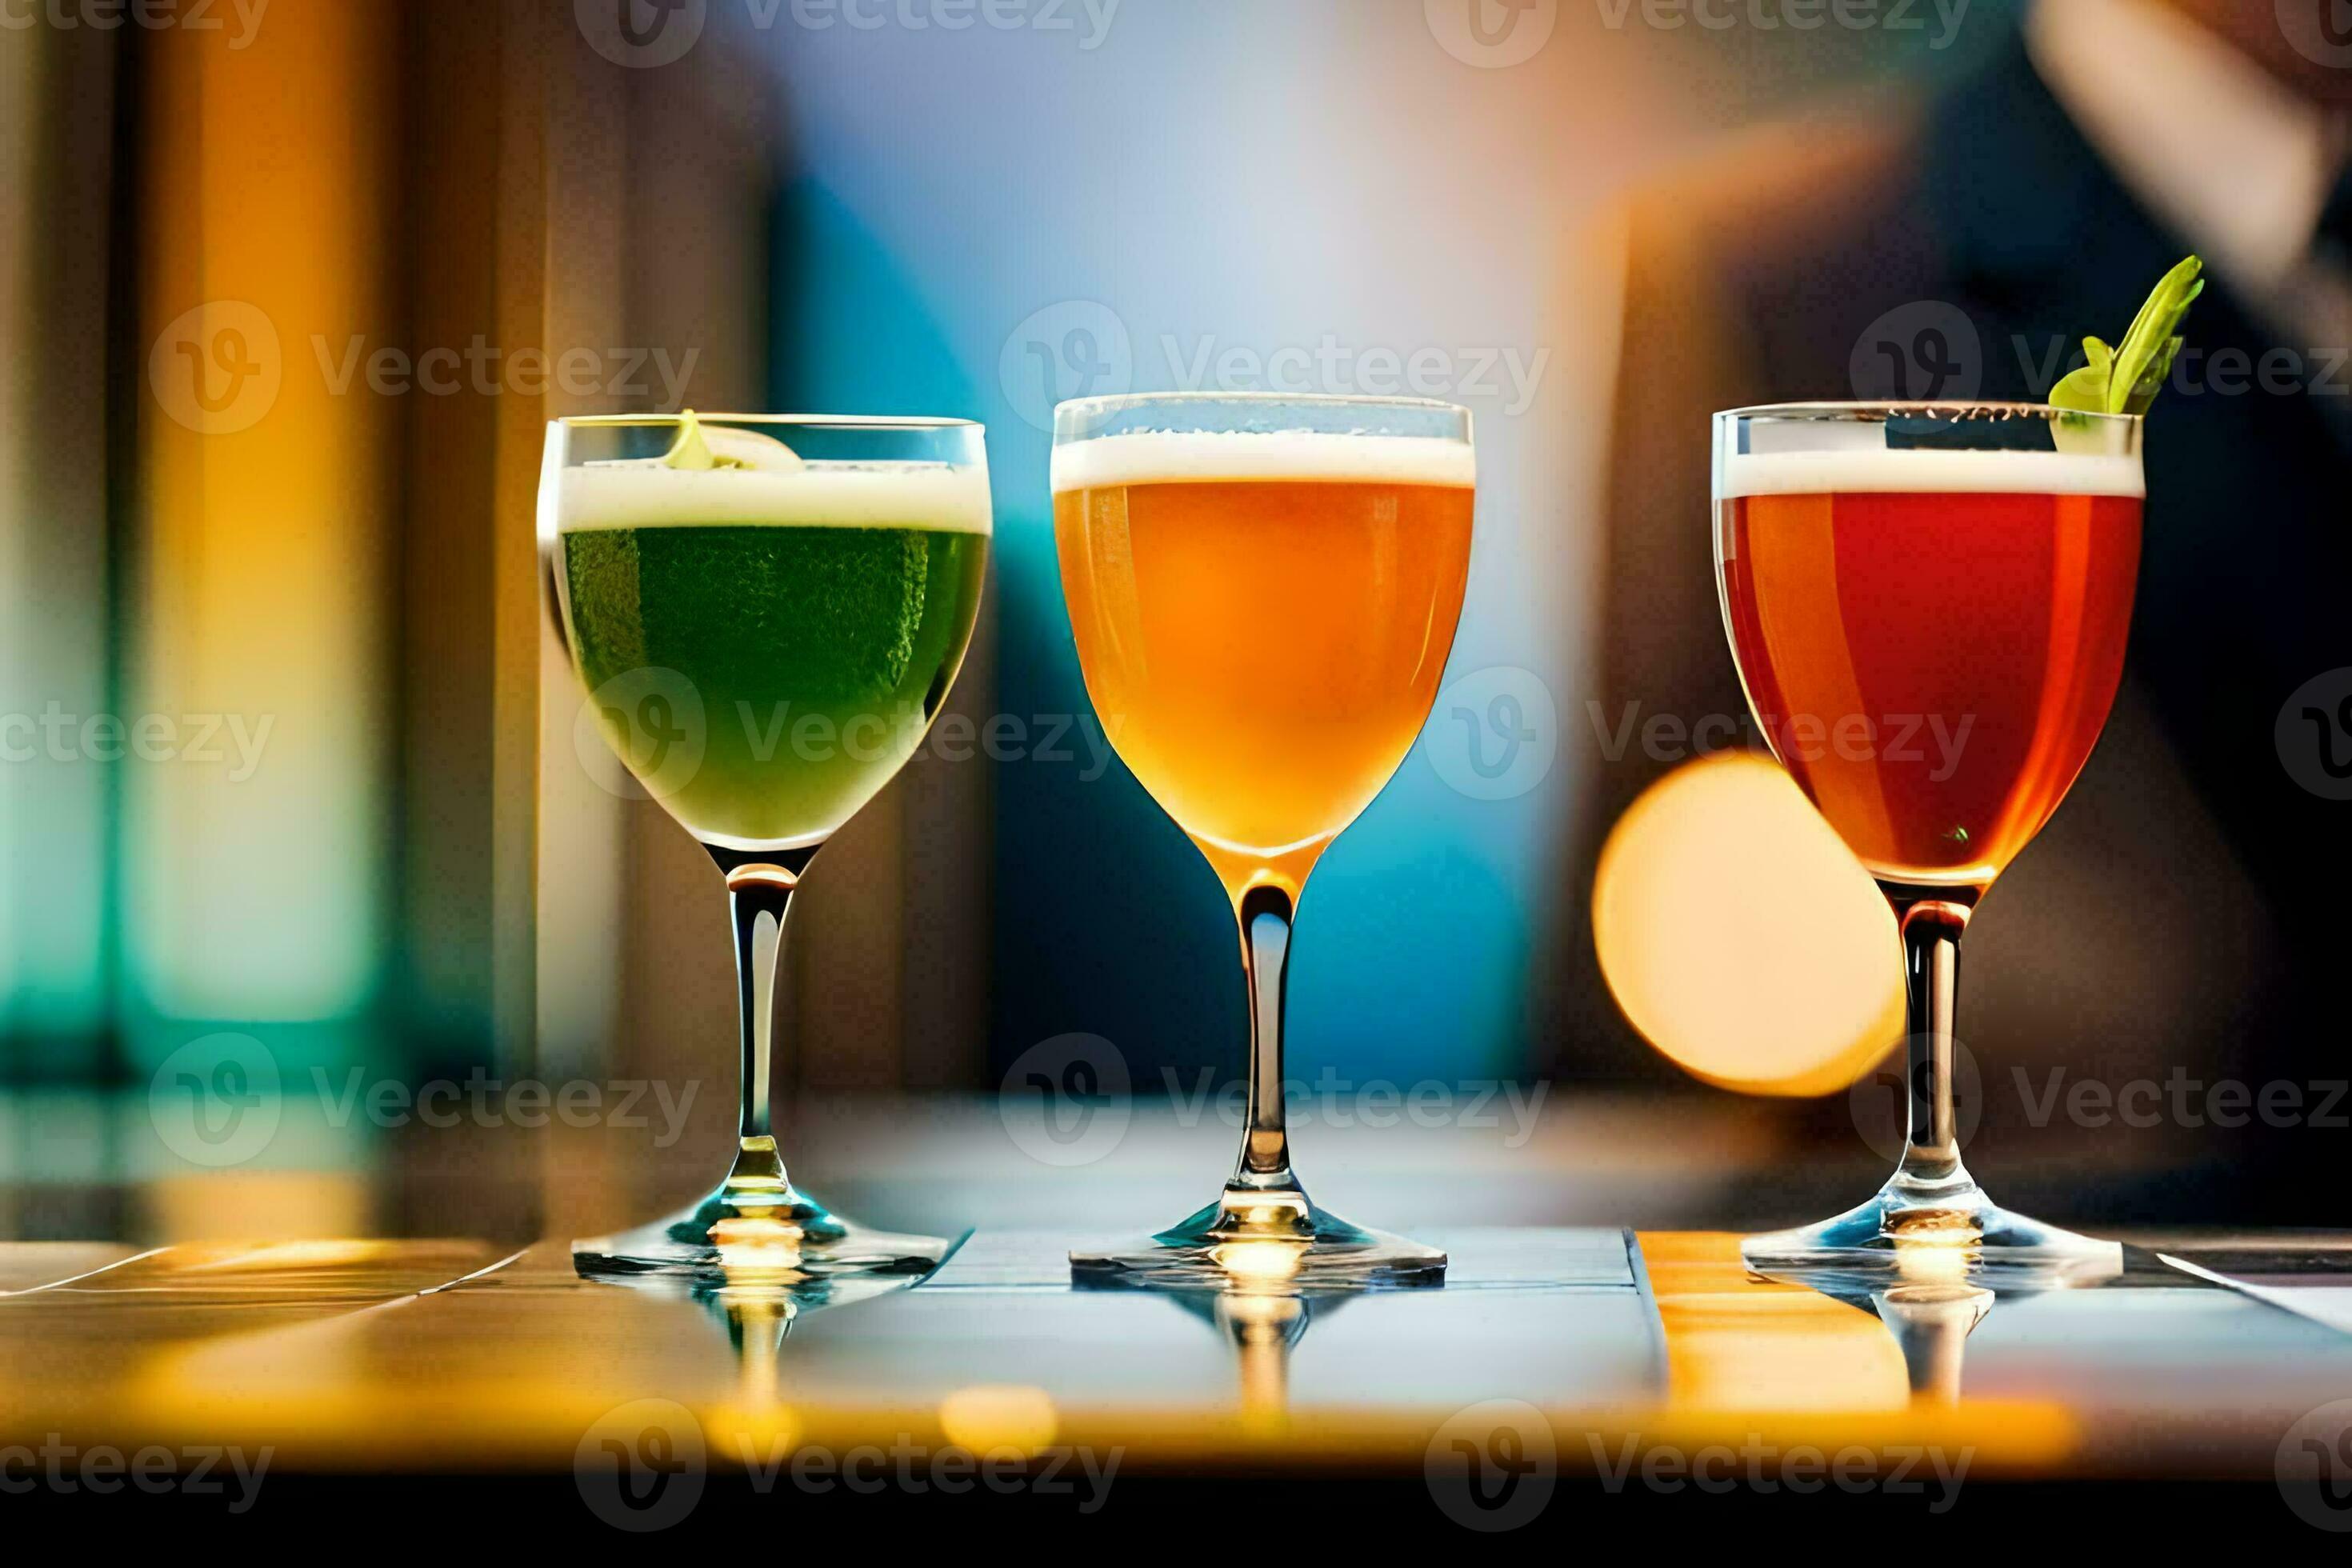 https://static.vecteezy.com/system/resources/previews/030/848/181/large_2x/three-different-types-of-drinks-in-glasses-on-a-bar-ai-generated-photo.jpg